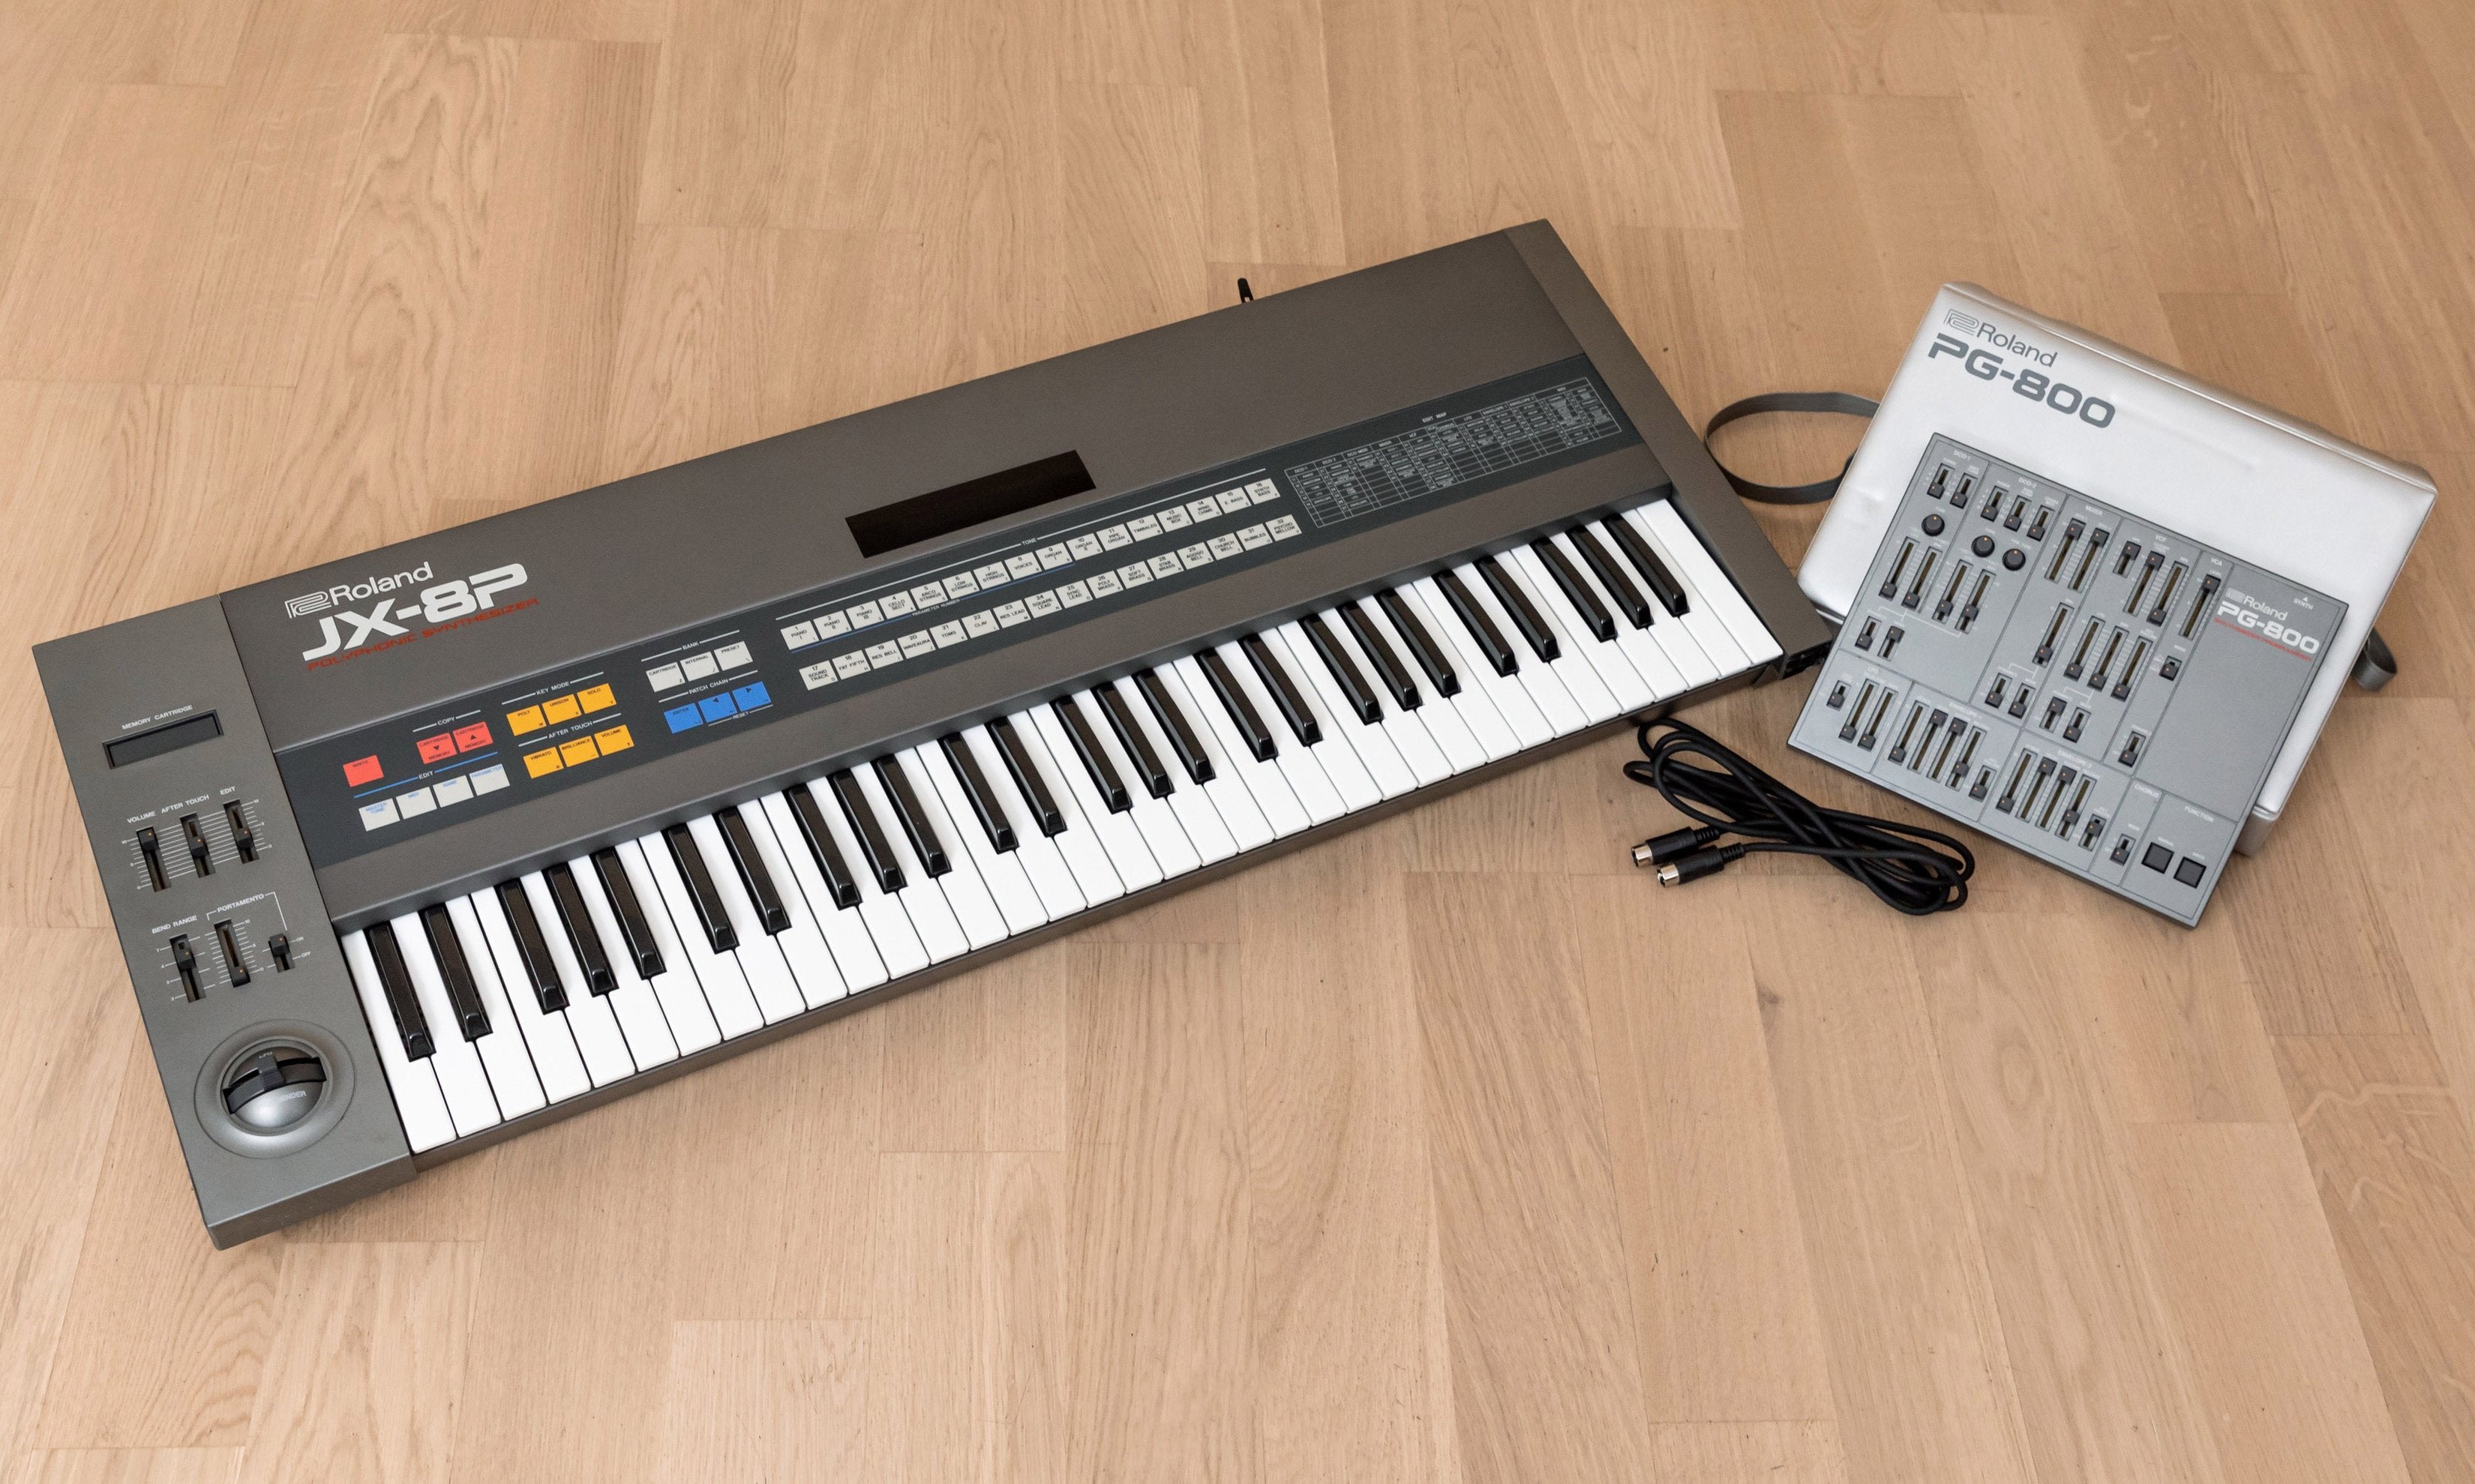 roland pg-800 jx-8pシンセサイザー コントローラー - www.top4all.pl